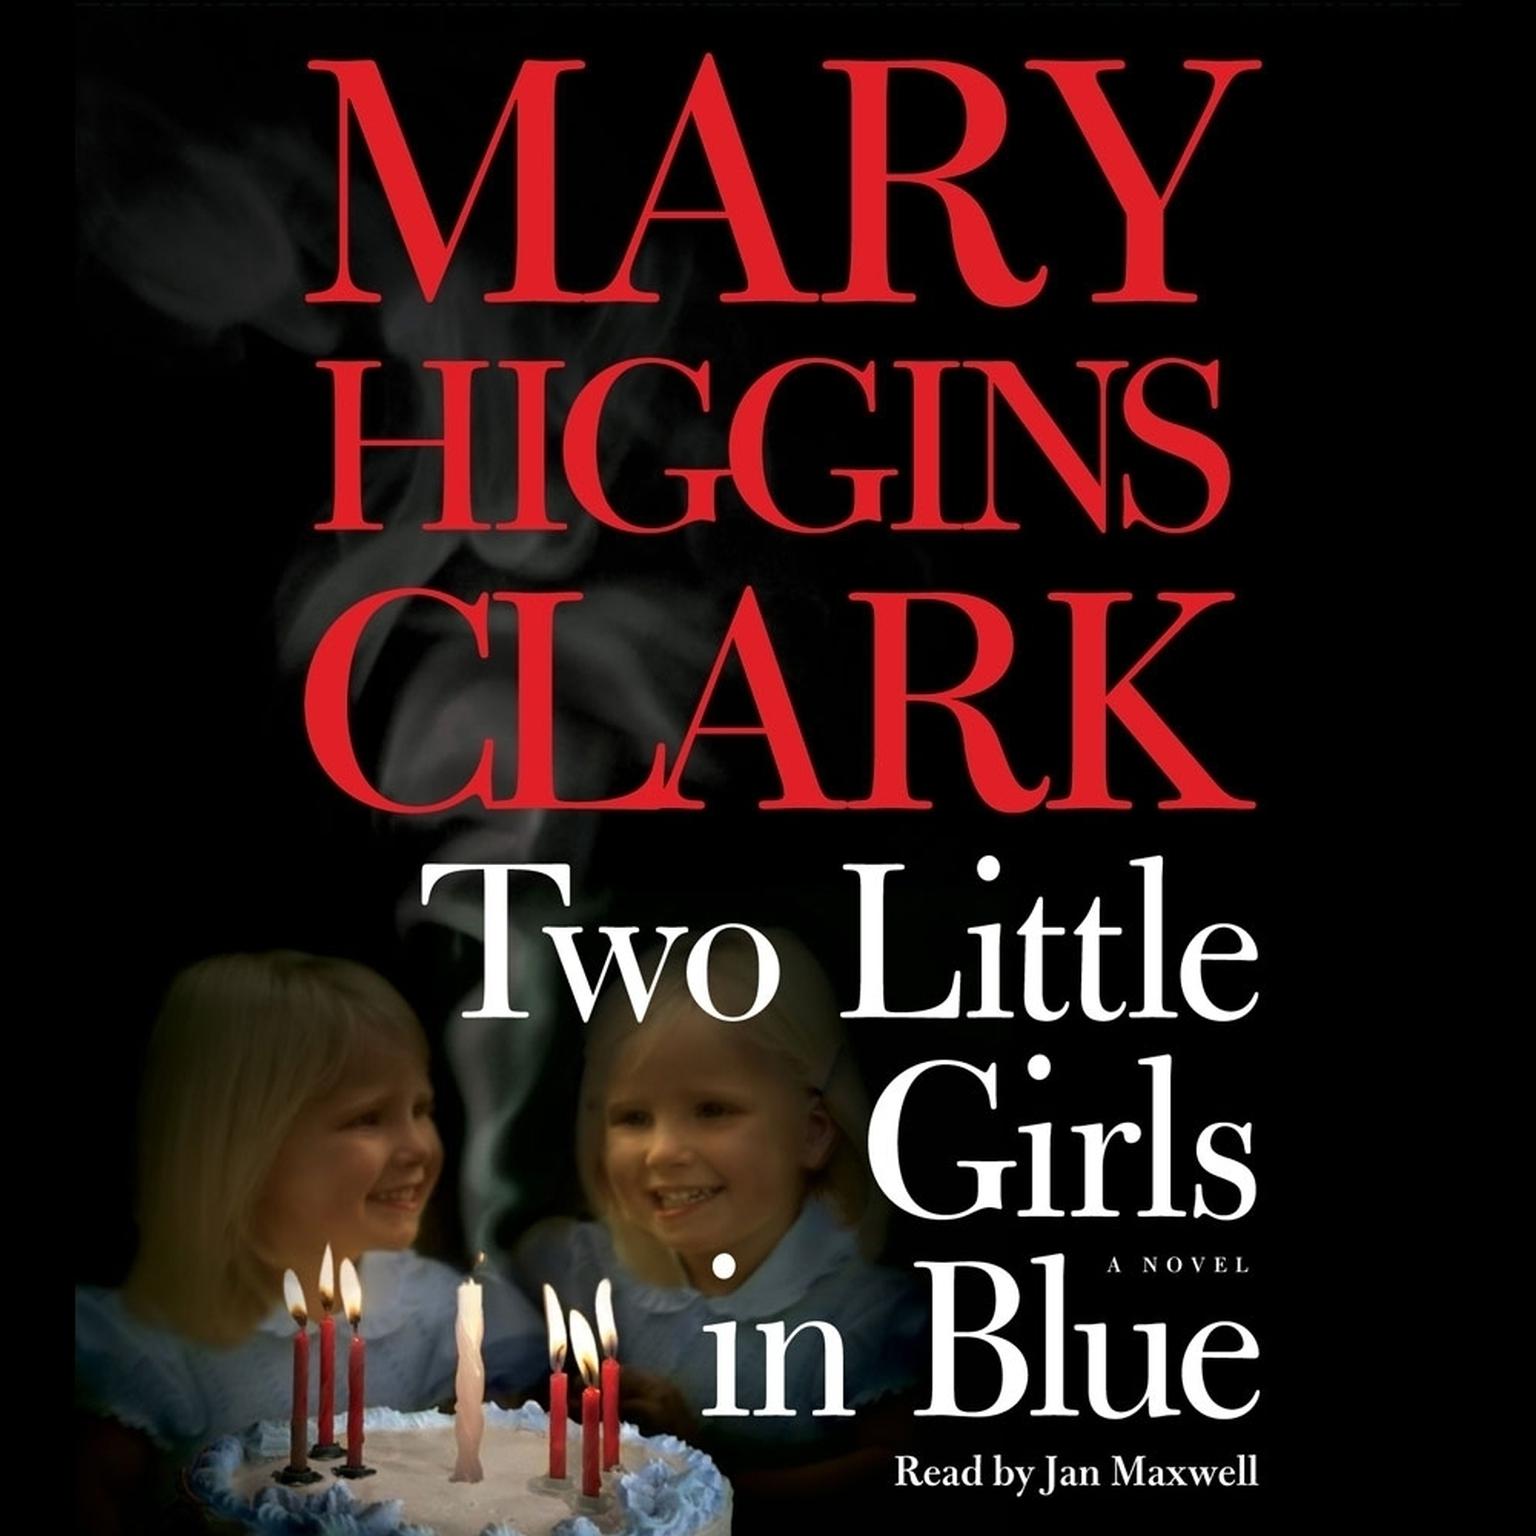 Two Little Girls in Blue (Abridged): A Novel Audiobook, by Mary Higgins Clark